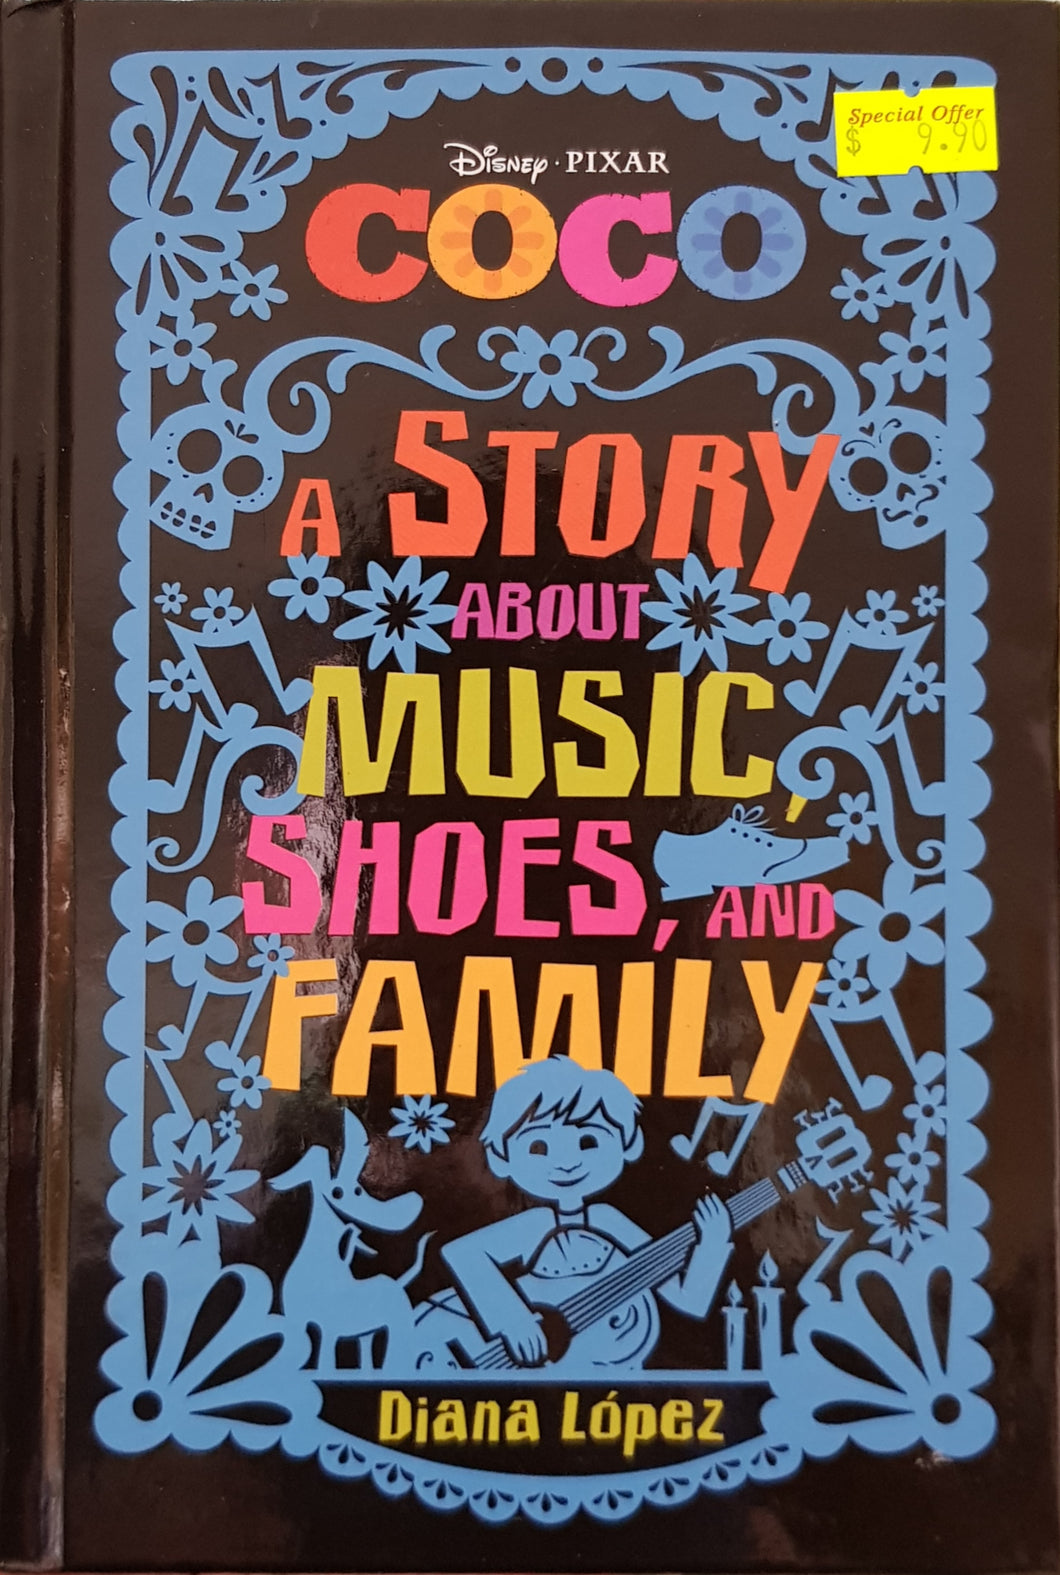 Coco: A Story about Music, Shoes, and Family - Diana Lopez